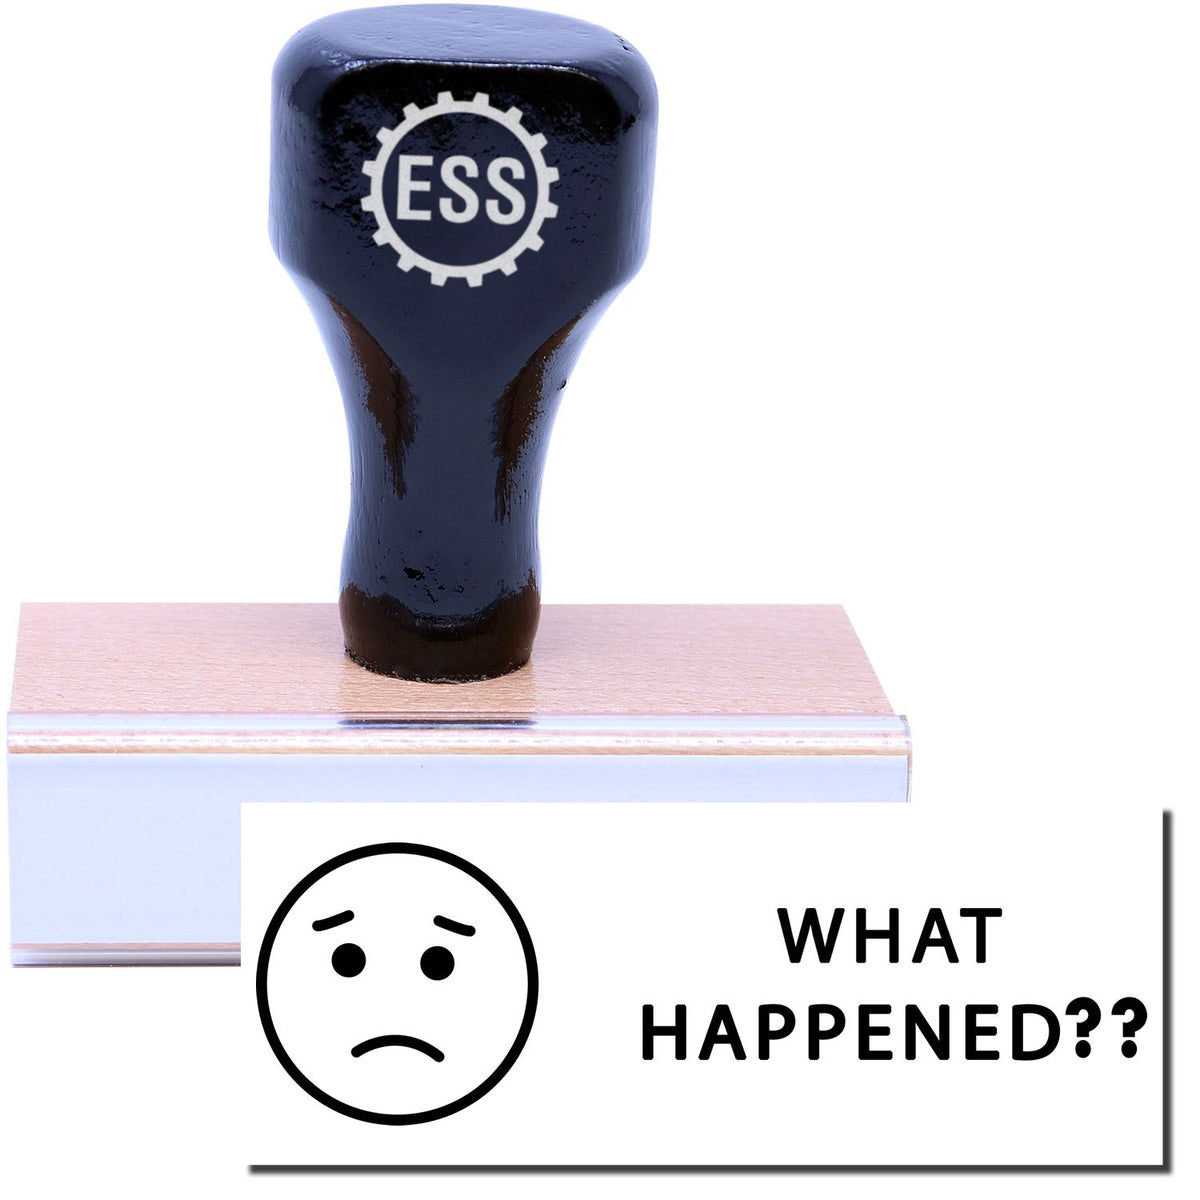 A stock office rubber stamp with a stamped image showing how the text &quot;WHAT HAPPENED??&quot; in bold font with a sad face image on the left side is displayed after stamping.